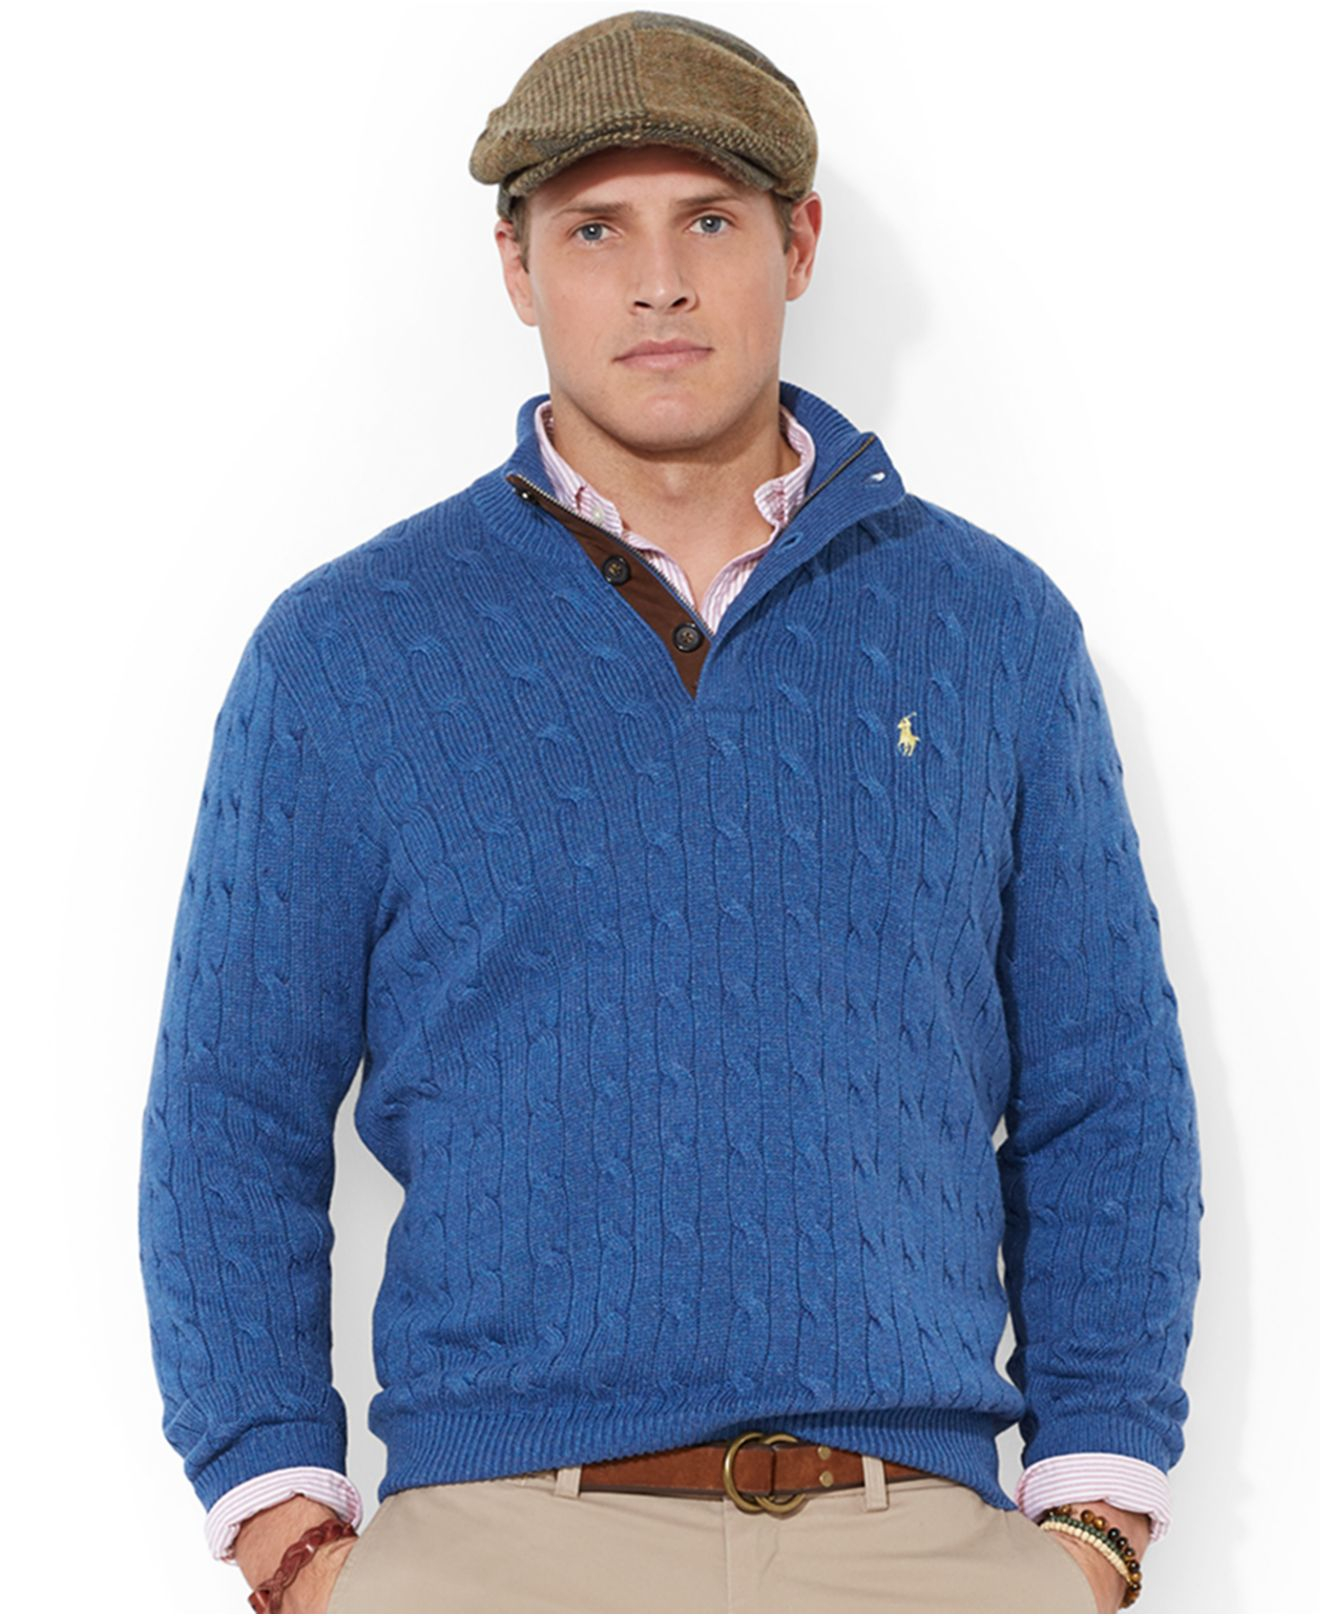 Lyst - Polo ralph lauren Big And Tall Cable-Knit Tussah Silk Sweater in ...